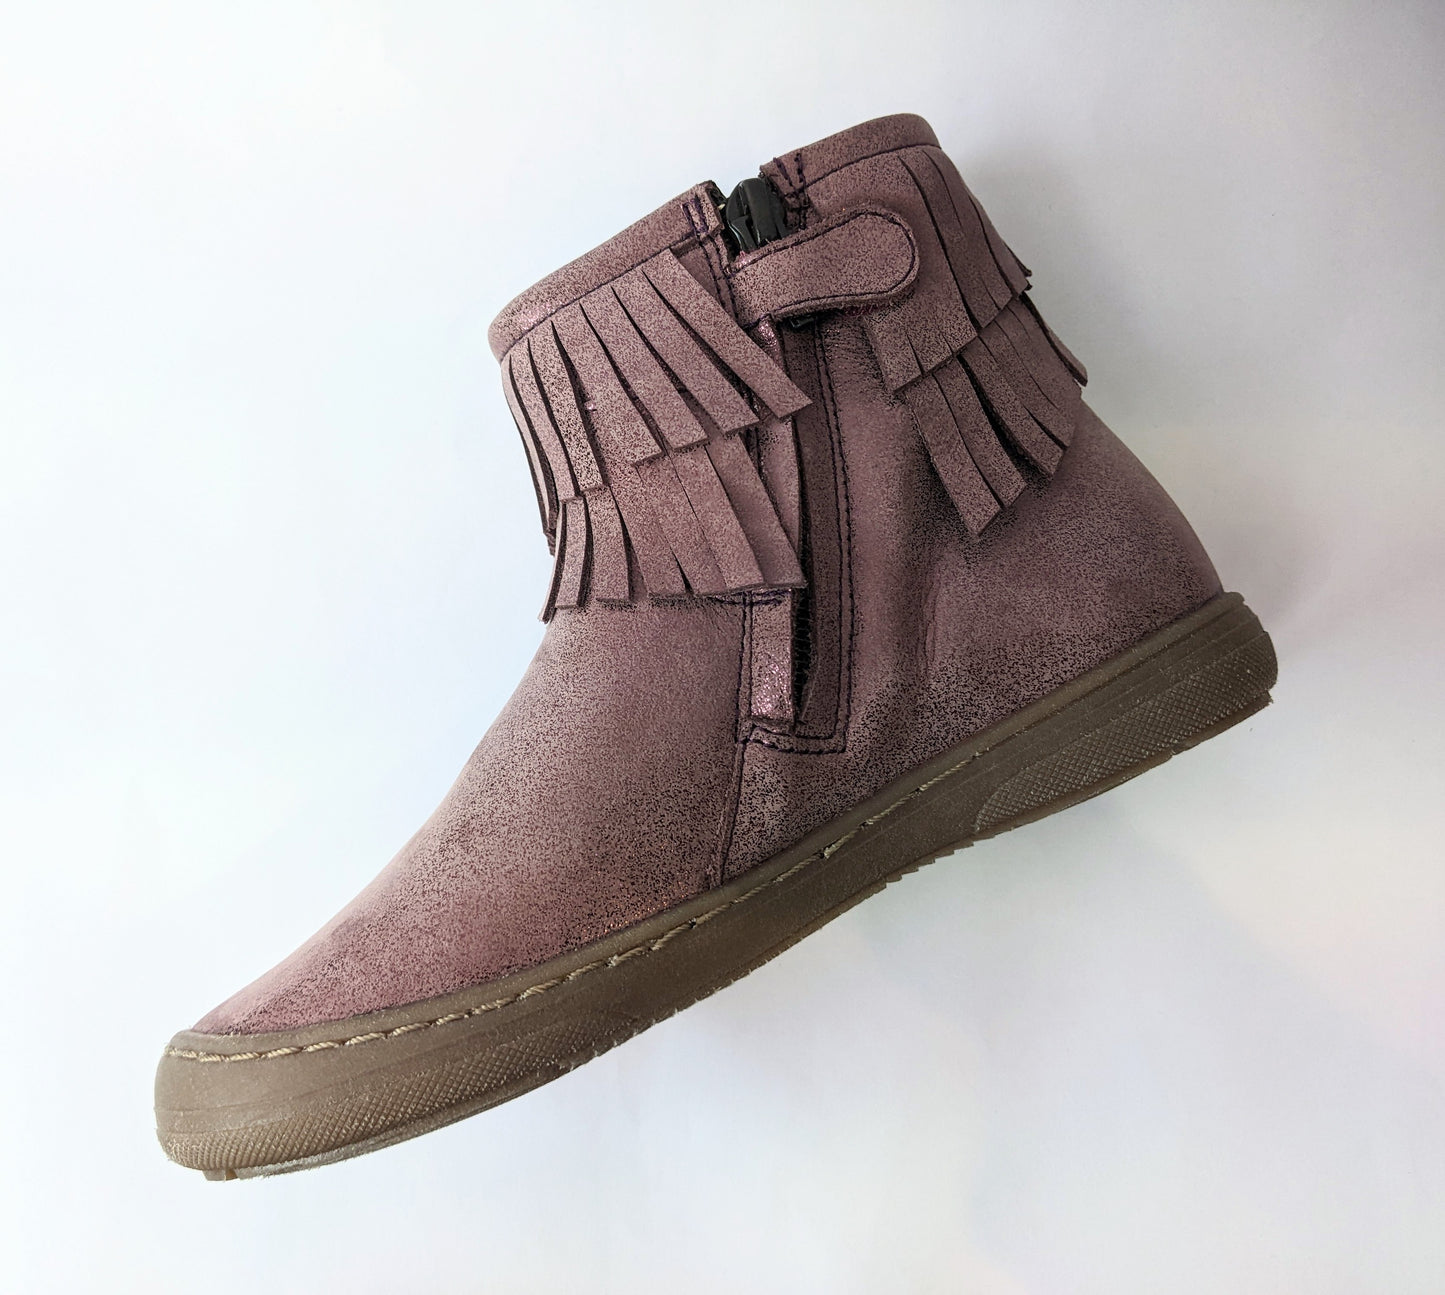 A girls ankle boot by Froddo, style G3160108-1,in pink shimmer with zip fastening. Angled view.